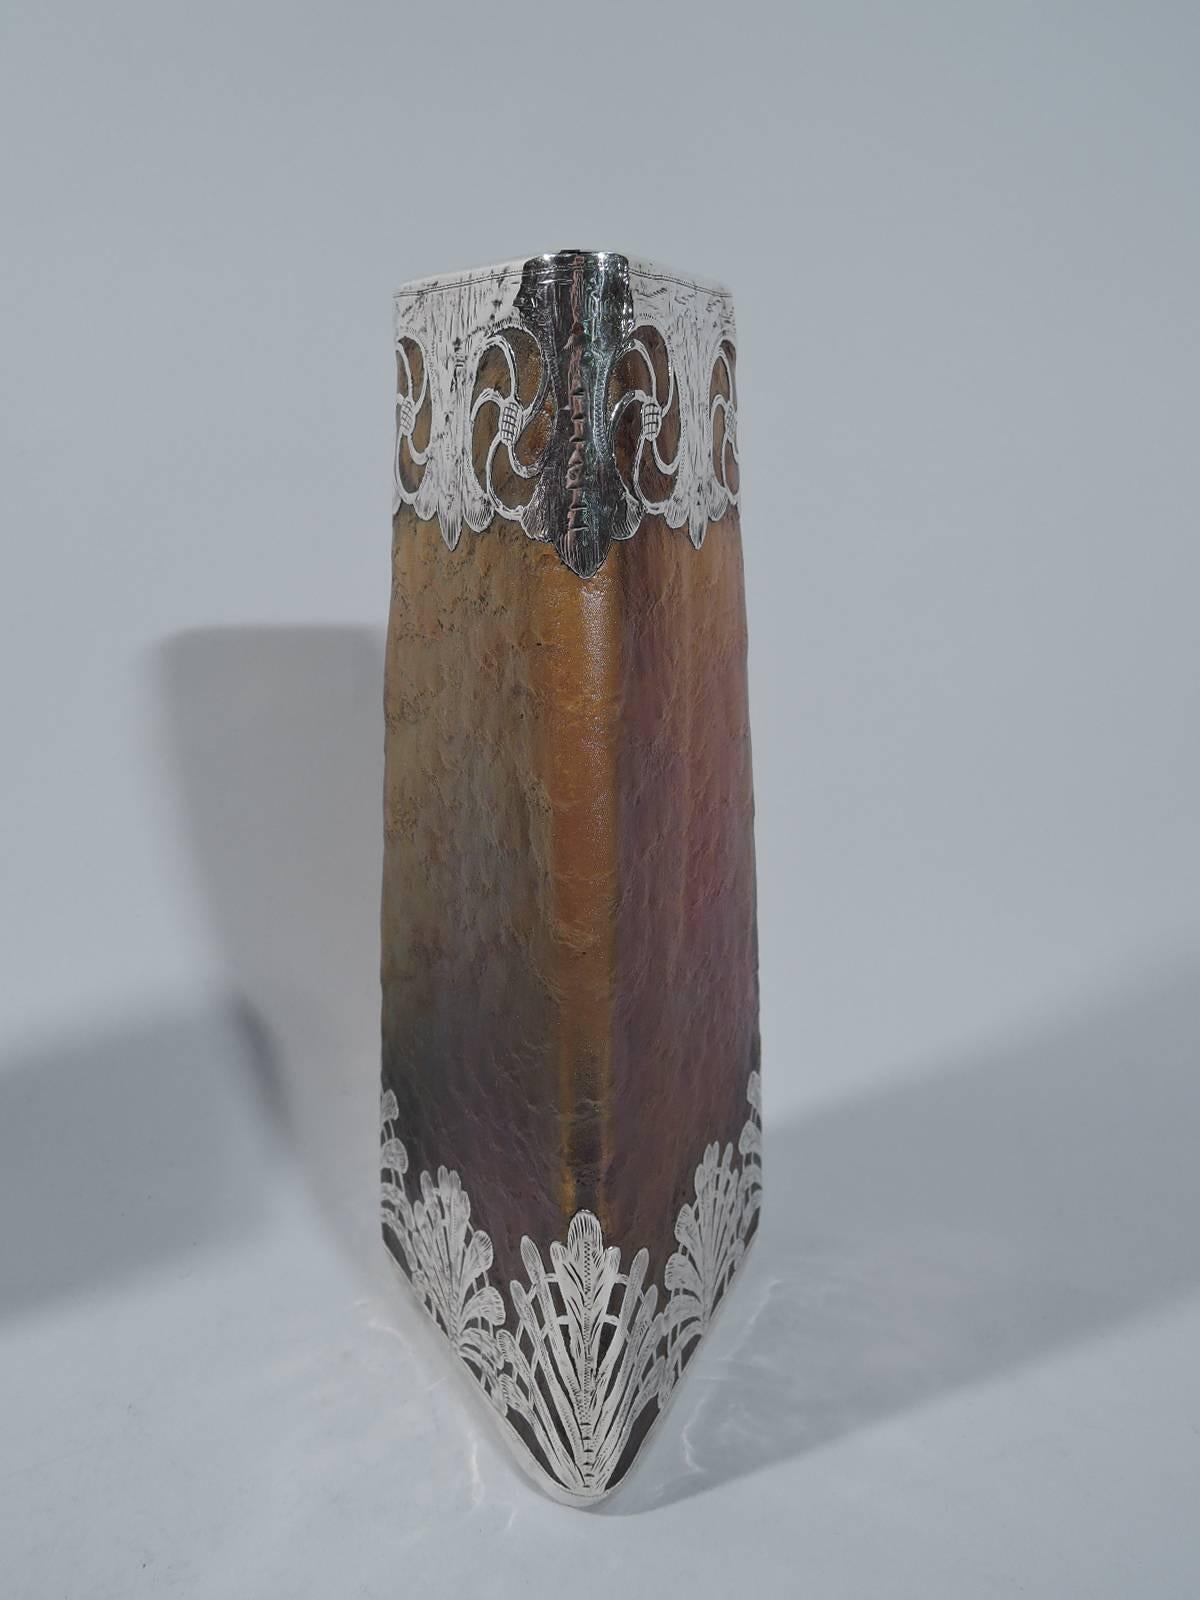 Pair of iridescent glass vases with silver overlay, ca 1900. Each: Three straight and upward tapering sides. The glass is thick and rusticated, and brownish in color. The base is overlaid with palmettes. The top is overlaid with rondels. Pontil